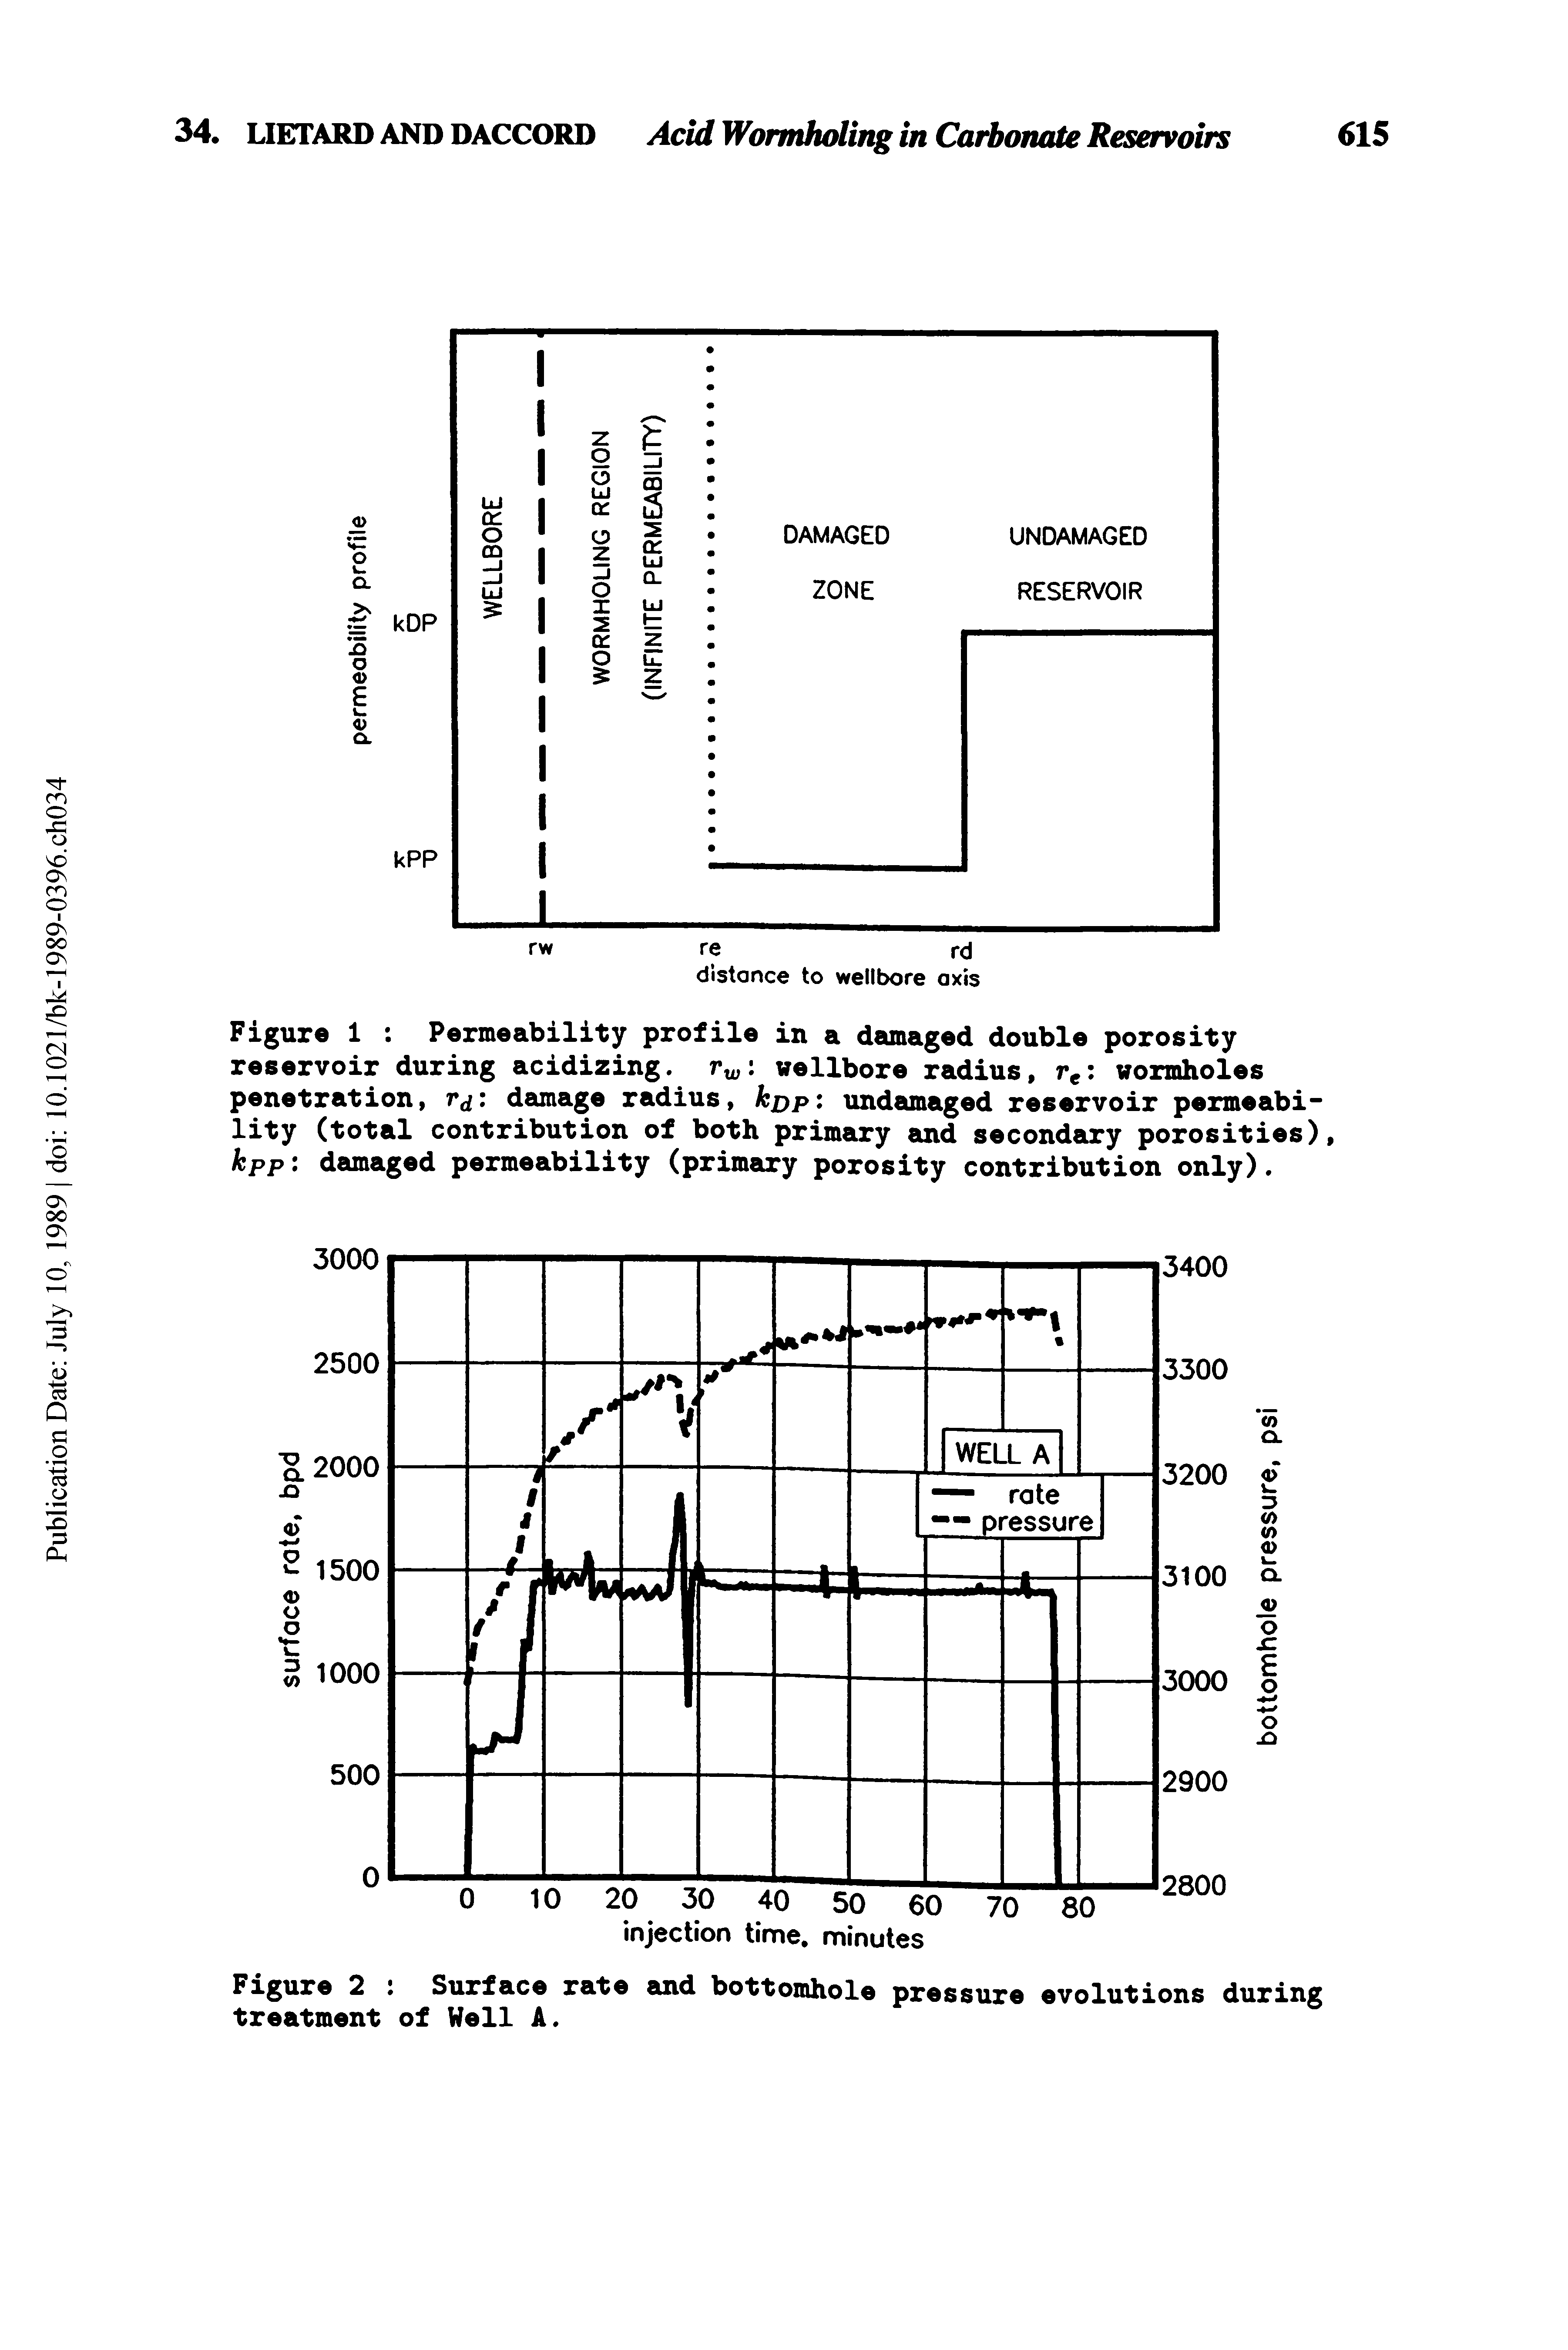 Figure 1 Permeability profile in a damaged double porosity reservoir during acidizing. rw wellbore radius, re wormholes penetration, damage radius, kptp undamaged reservoir permeability (total contribution of both primary and secondary porosities), kPP damaged permeability (primary porosity contribution only).